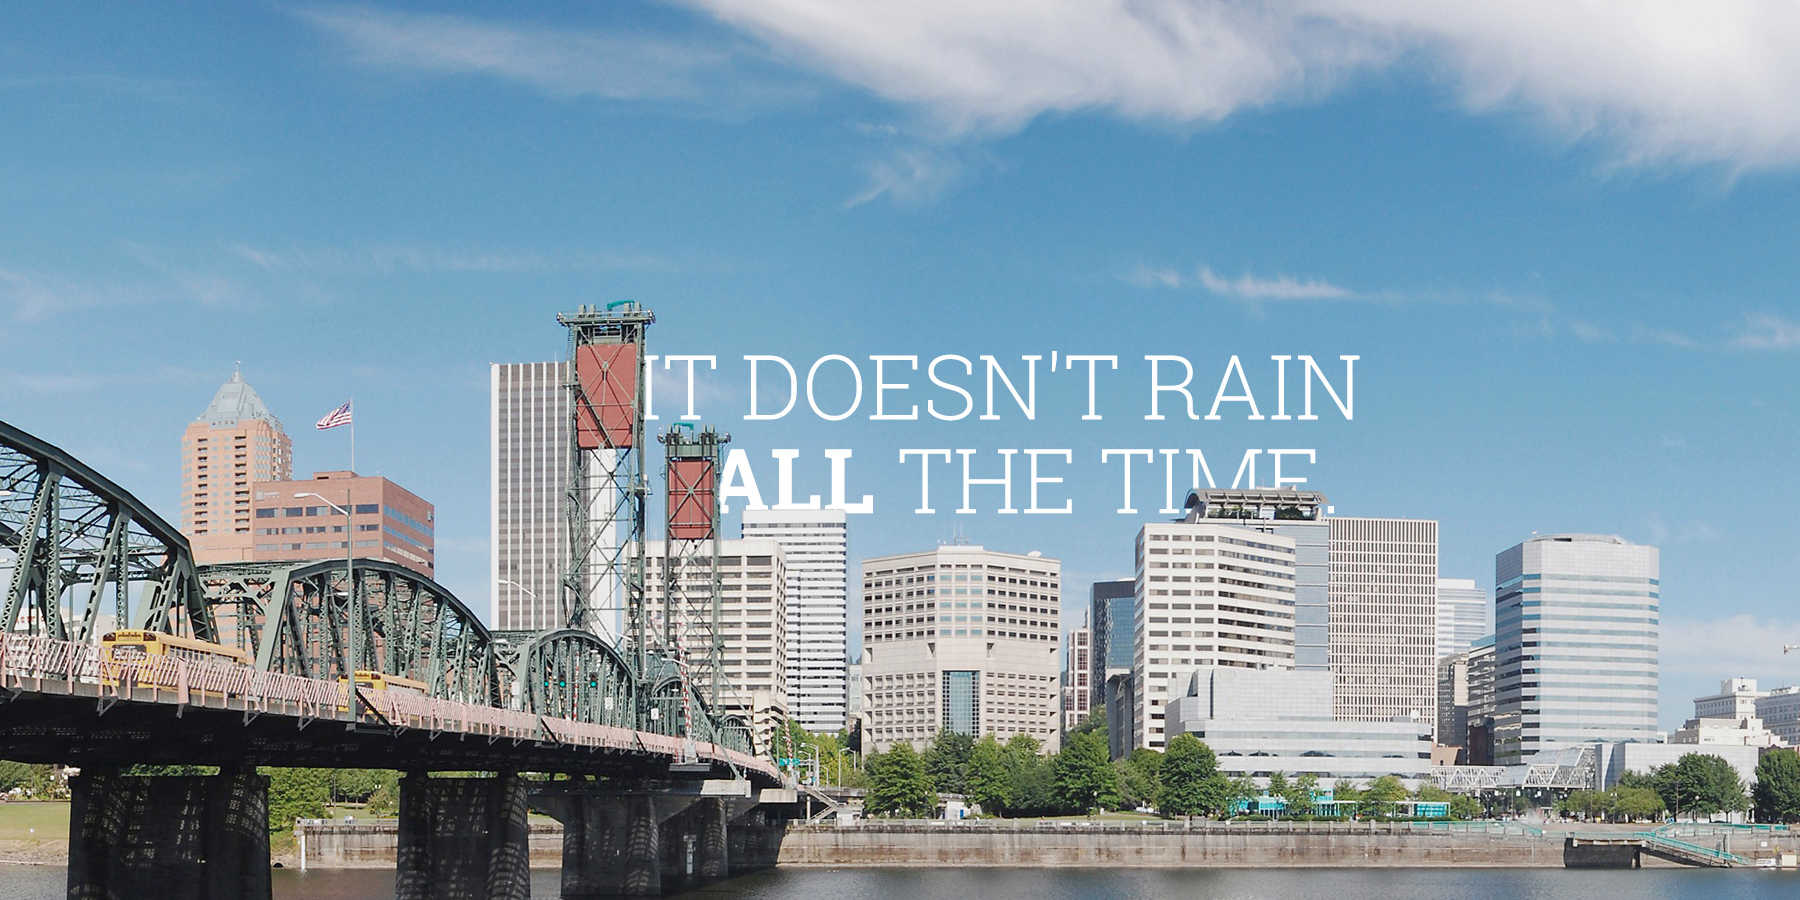 Portland - Best Restaurants, Bars and Things to Do - Thrillist